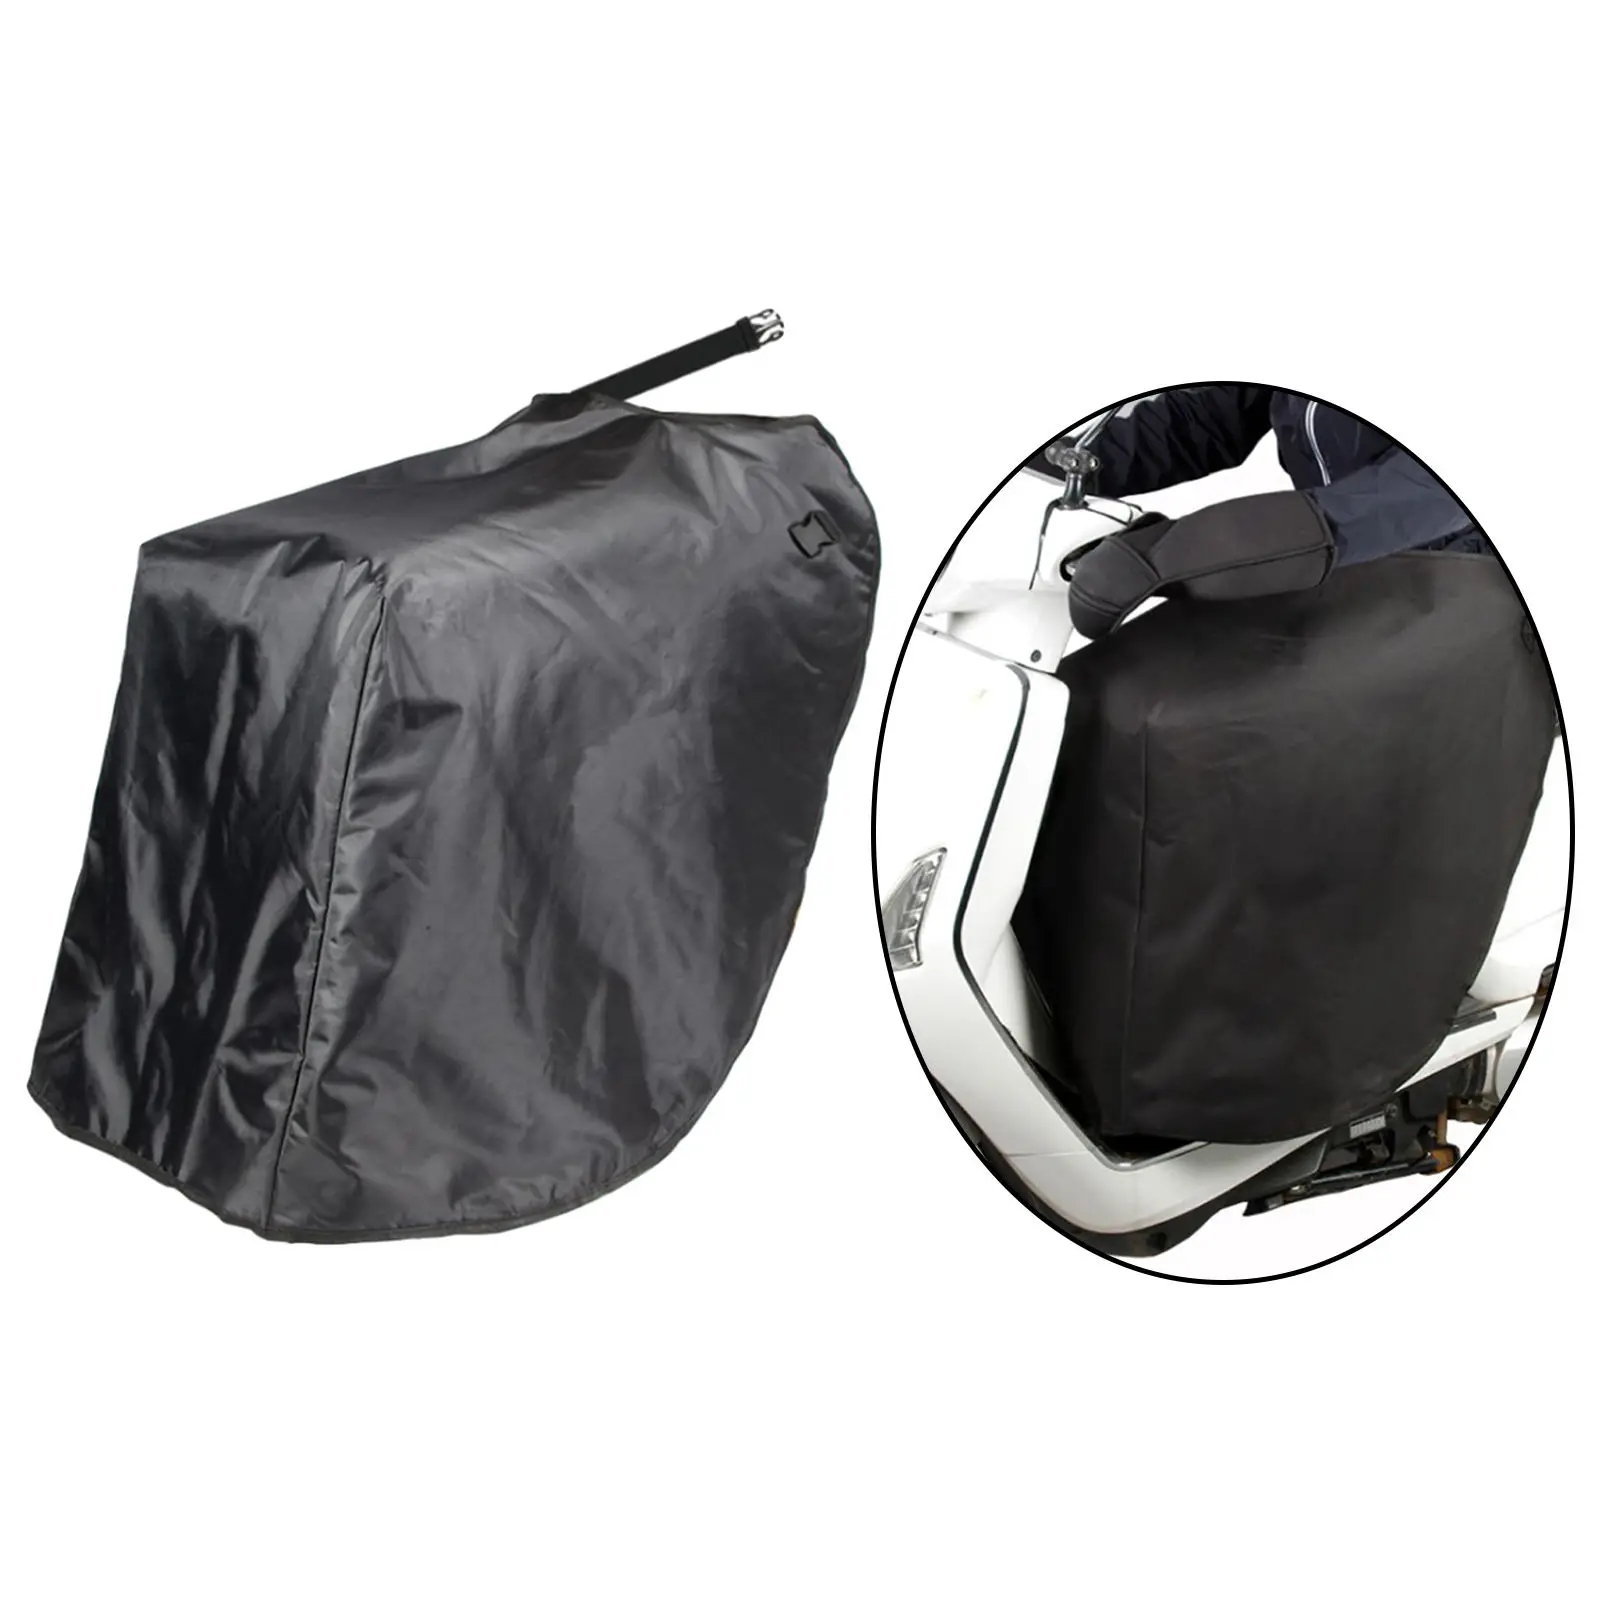 Winter Scooter Leg Lap Apron Cover Motorcycle Quilt Leg Cover Windproof Warm Ridding Knee Pads Leg Guard Cover